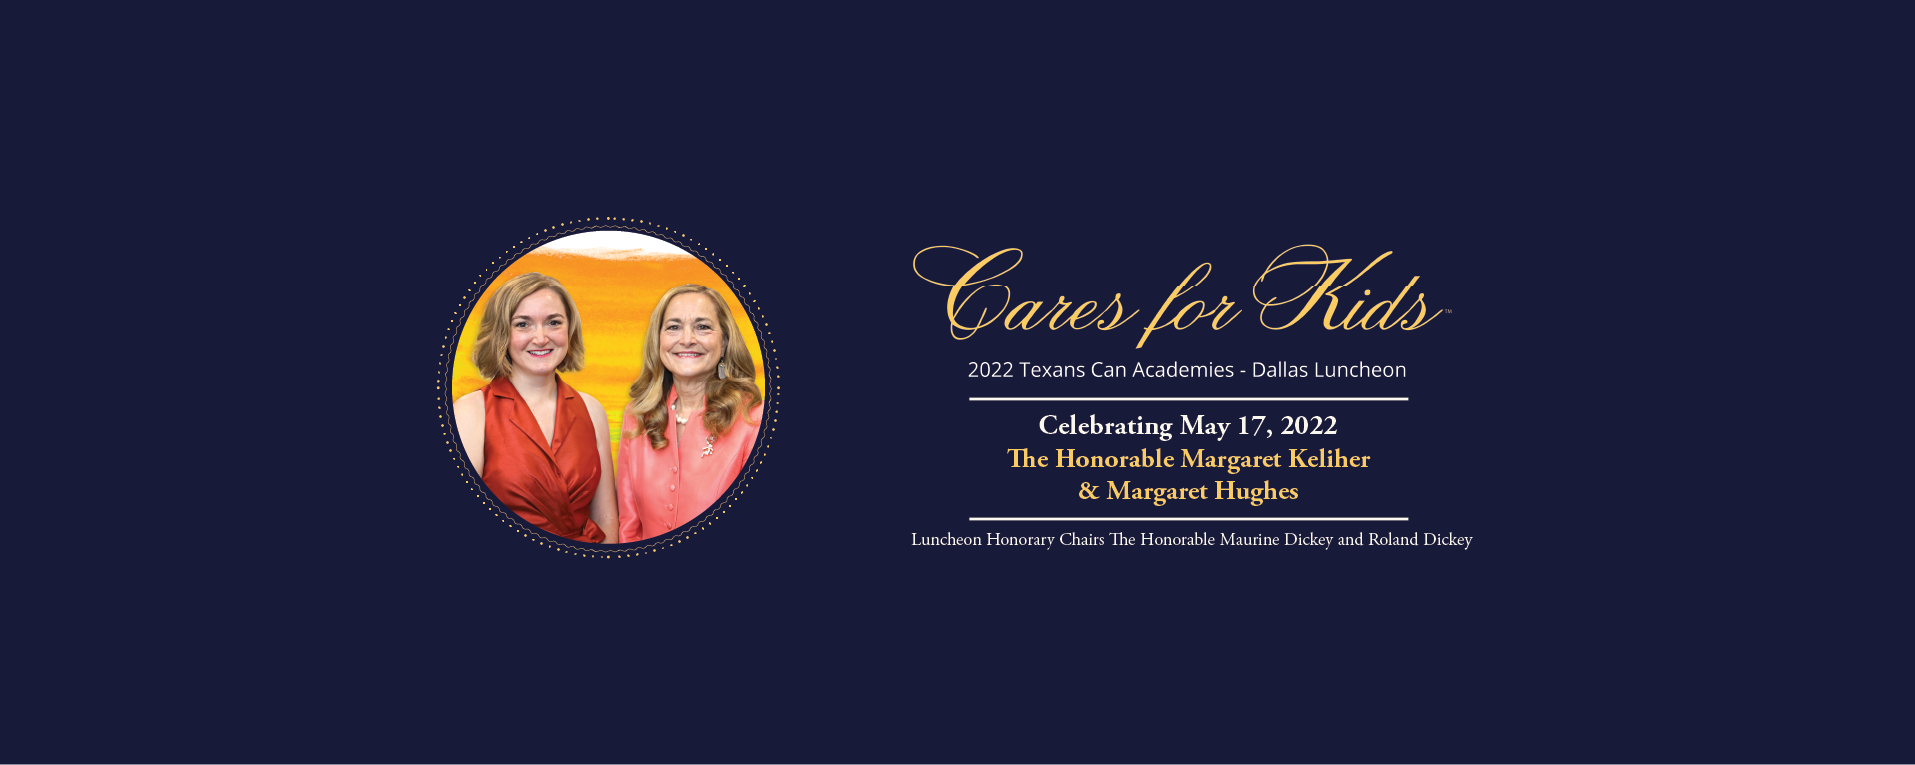 Texans Can Cares for Kids Dallas Luncheon 2022